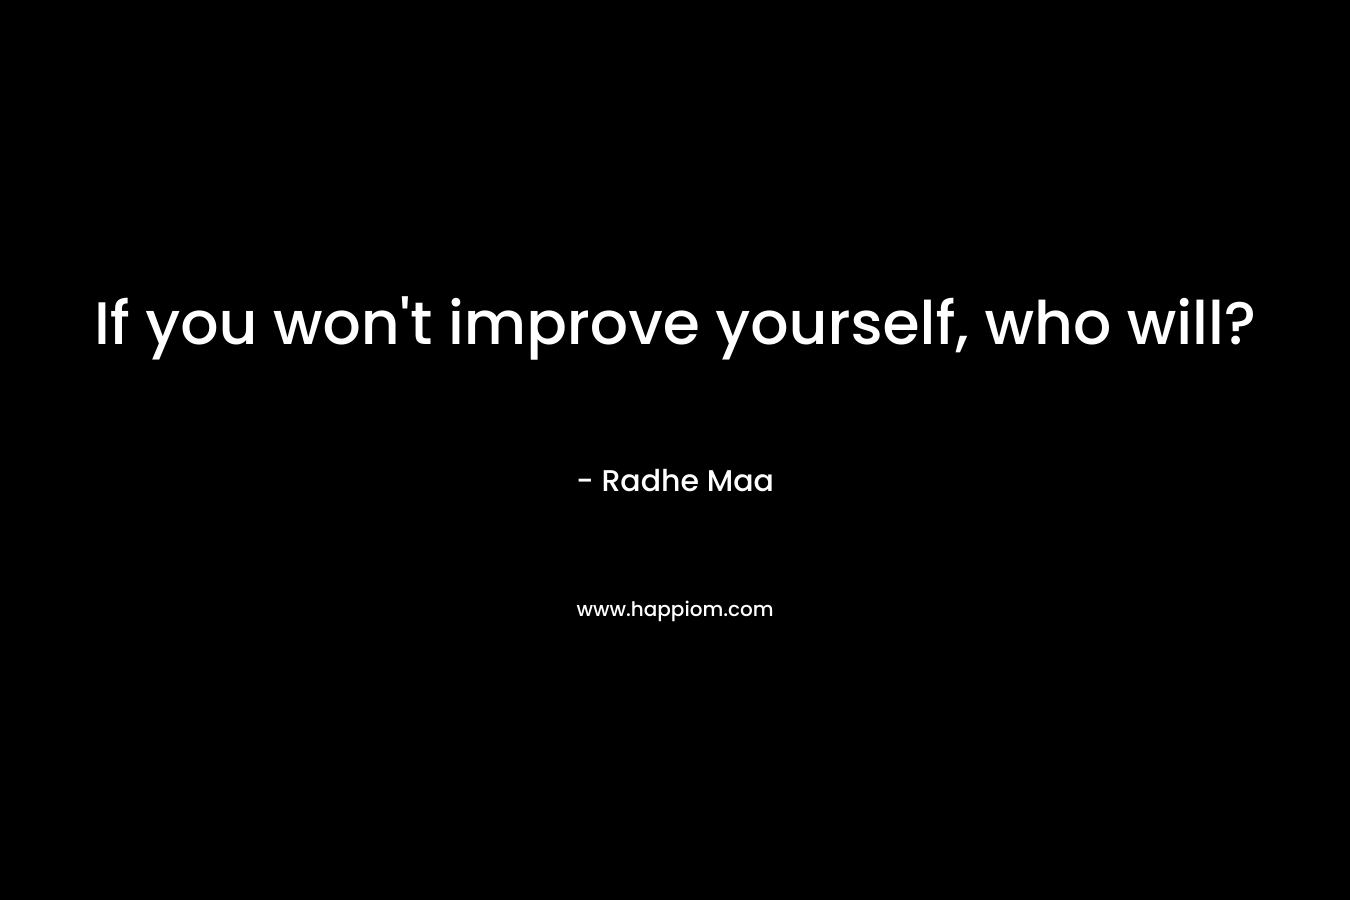 If you won't improve yourself, who will?